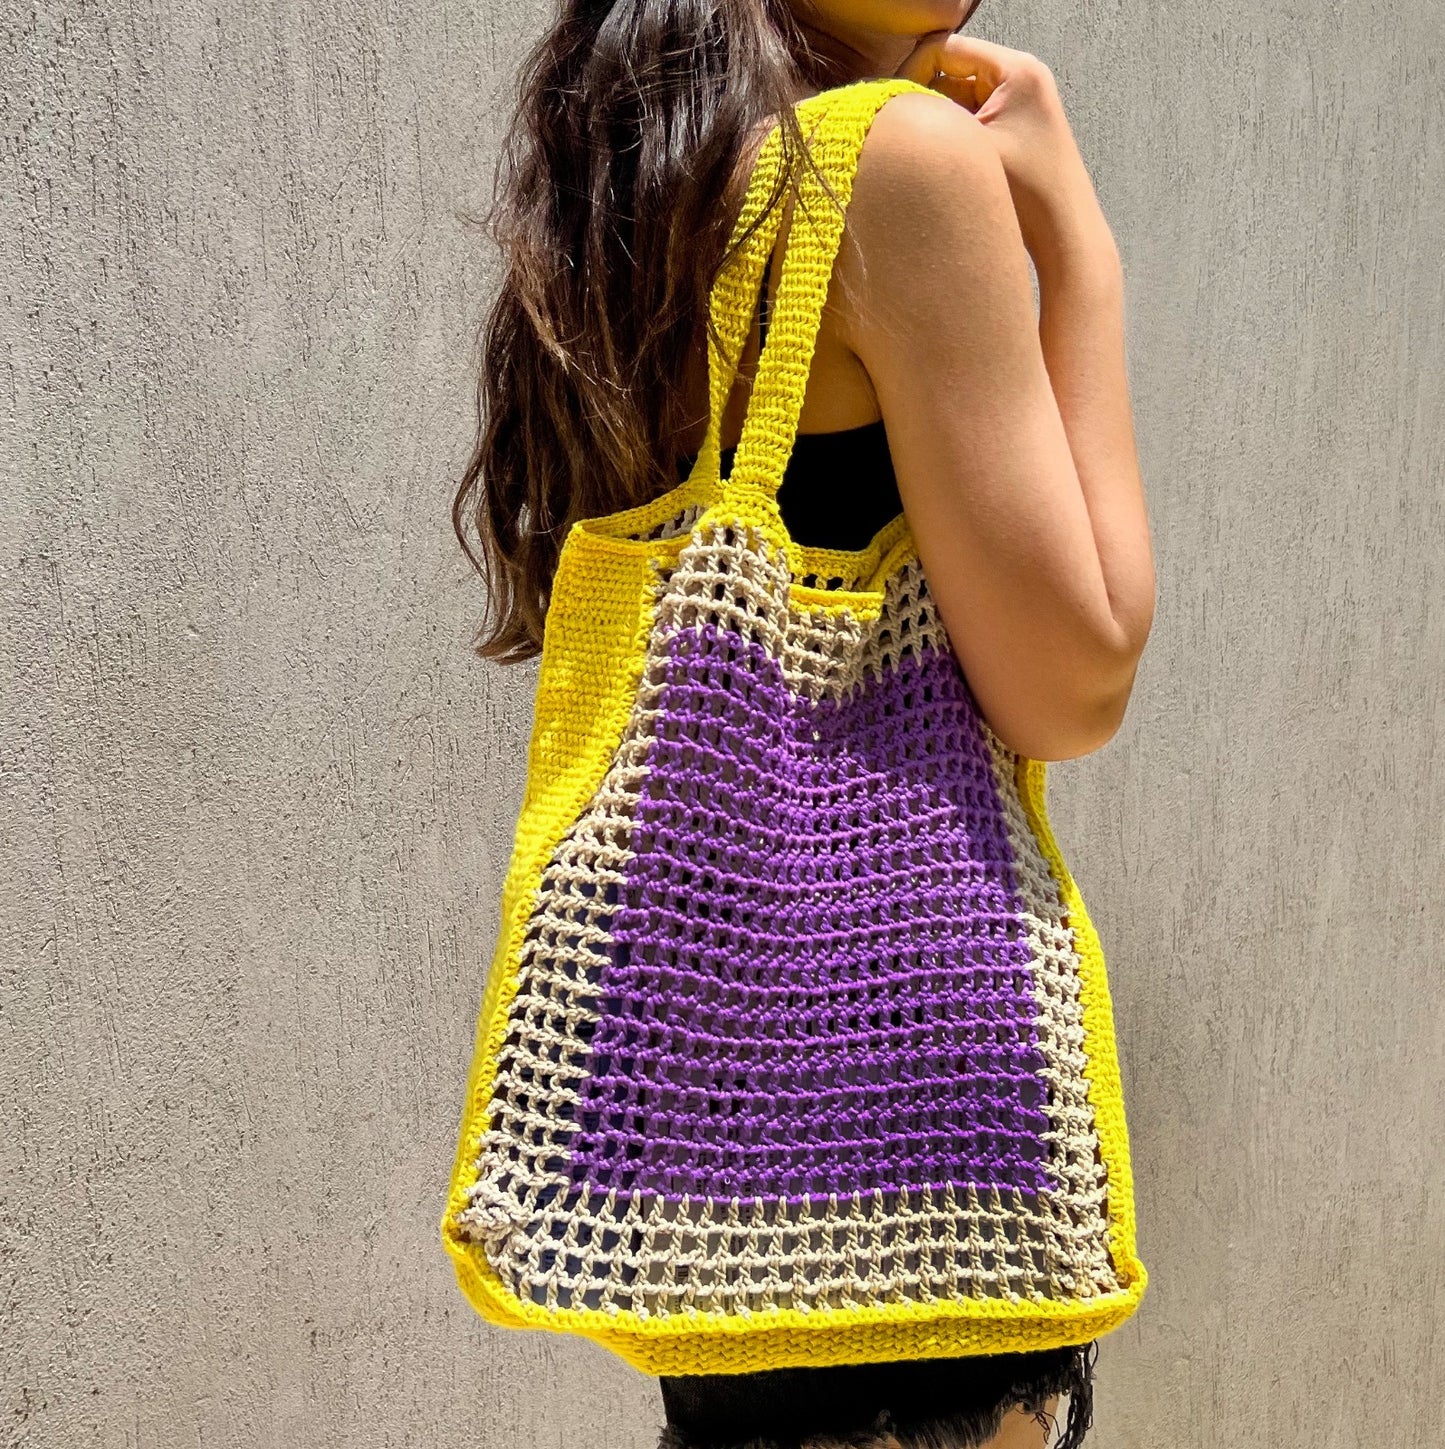 The Knit Tote In Purple And Yellow